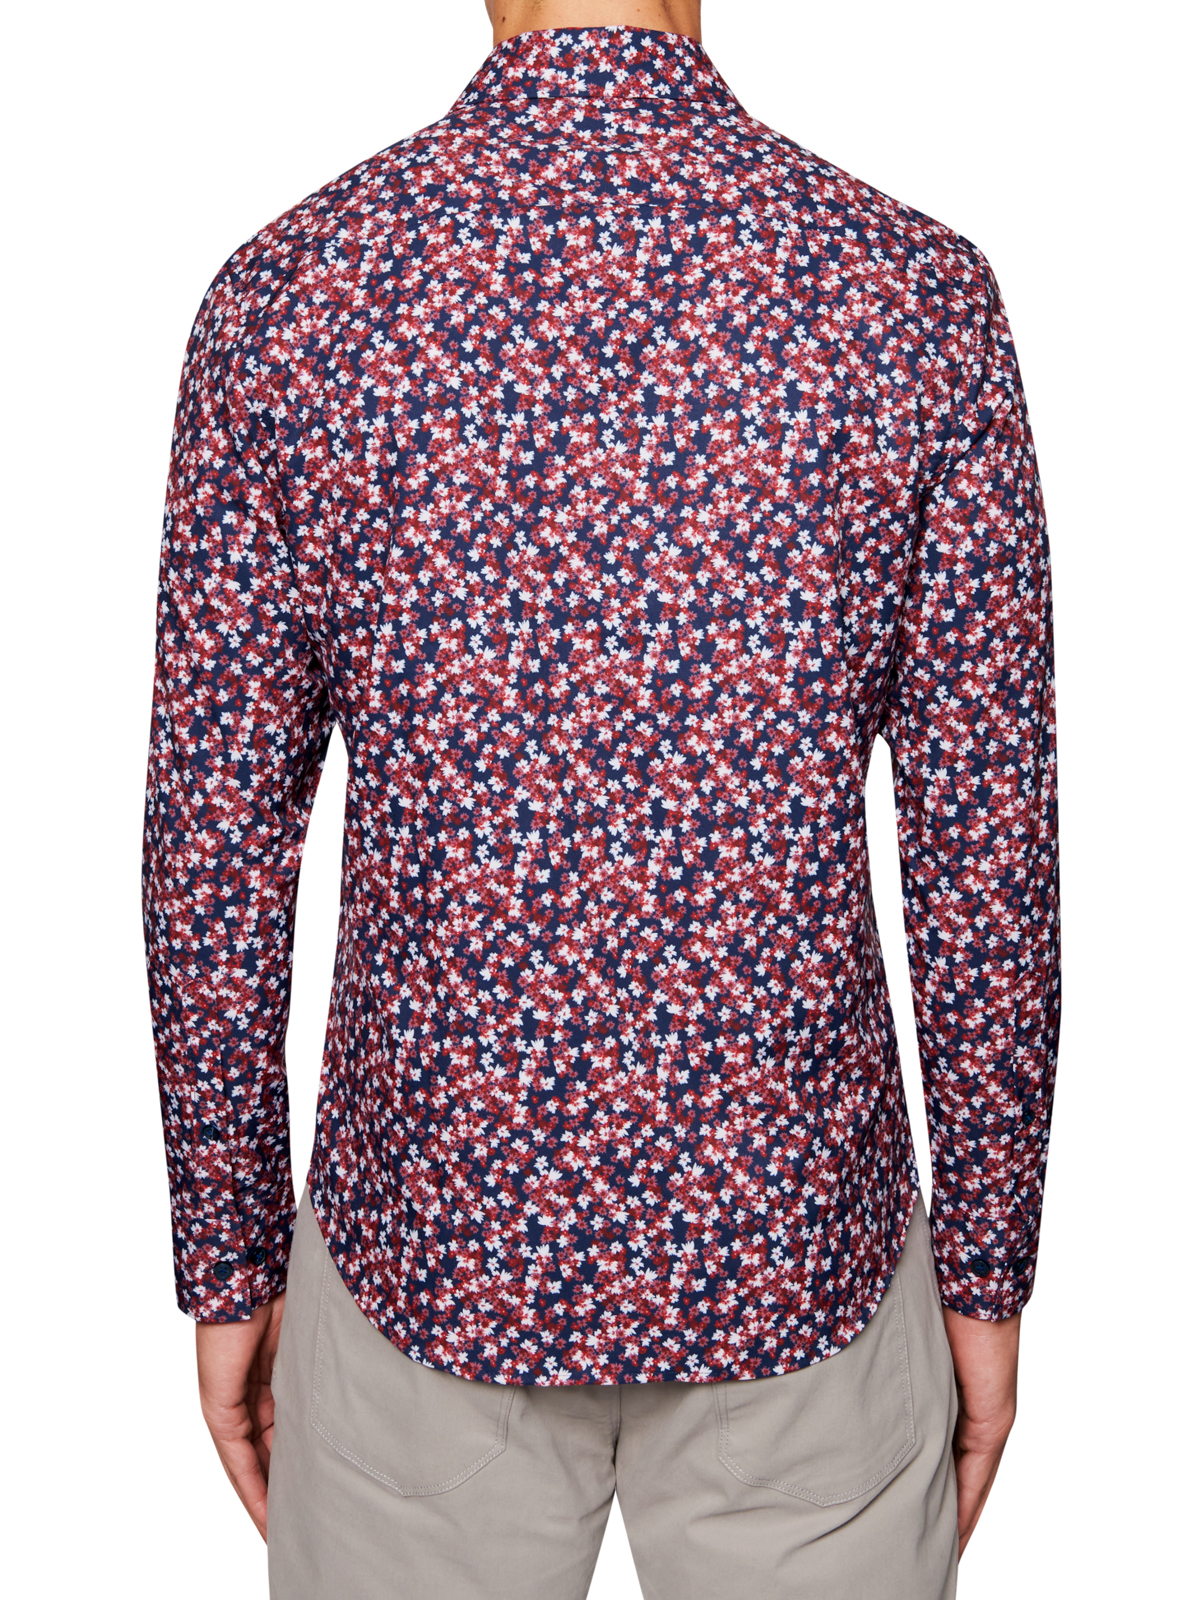 TOSSED FLORAL PERFORMANCE STRETCH LONG SLEEVE SHIRT